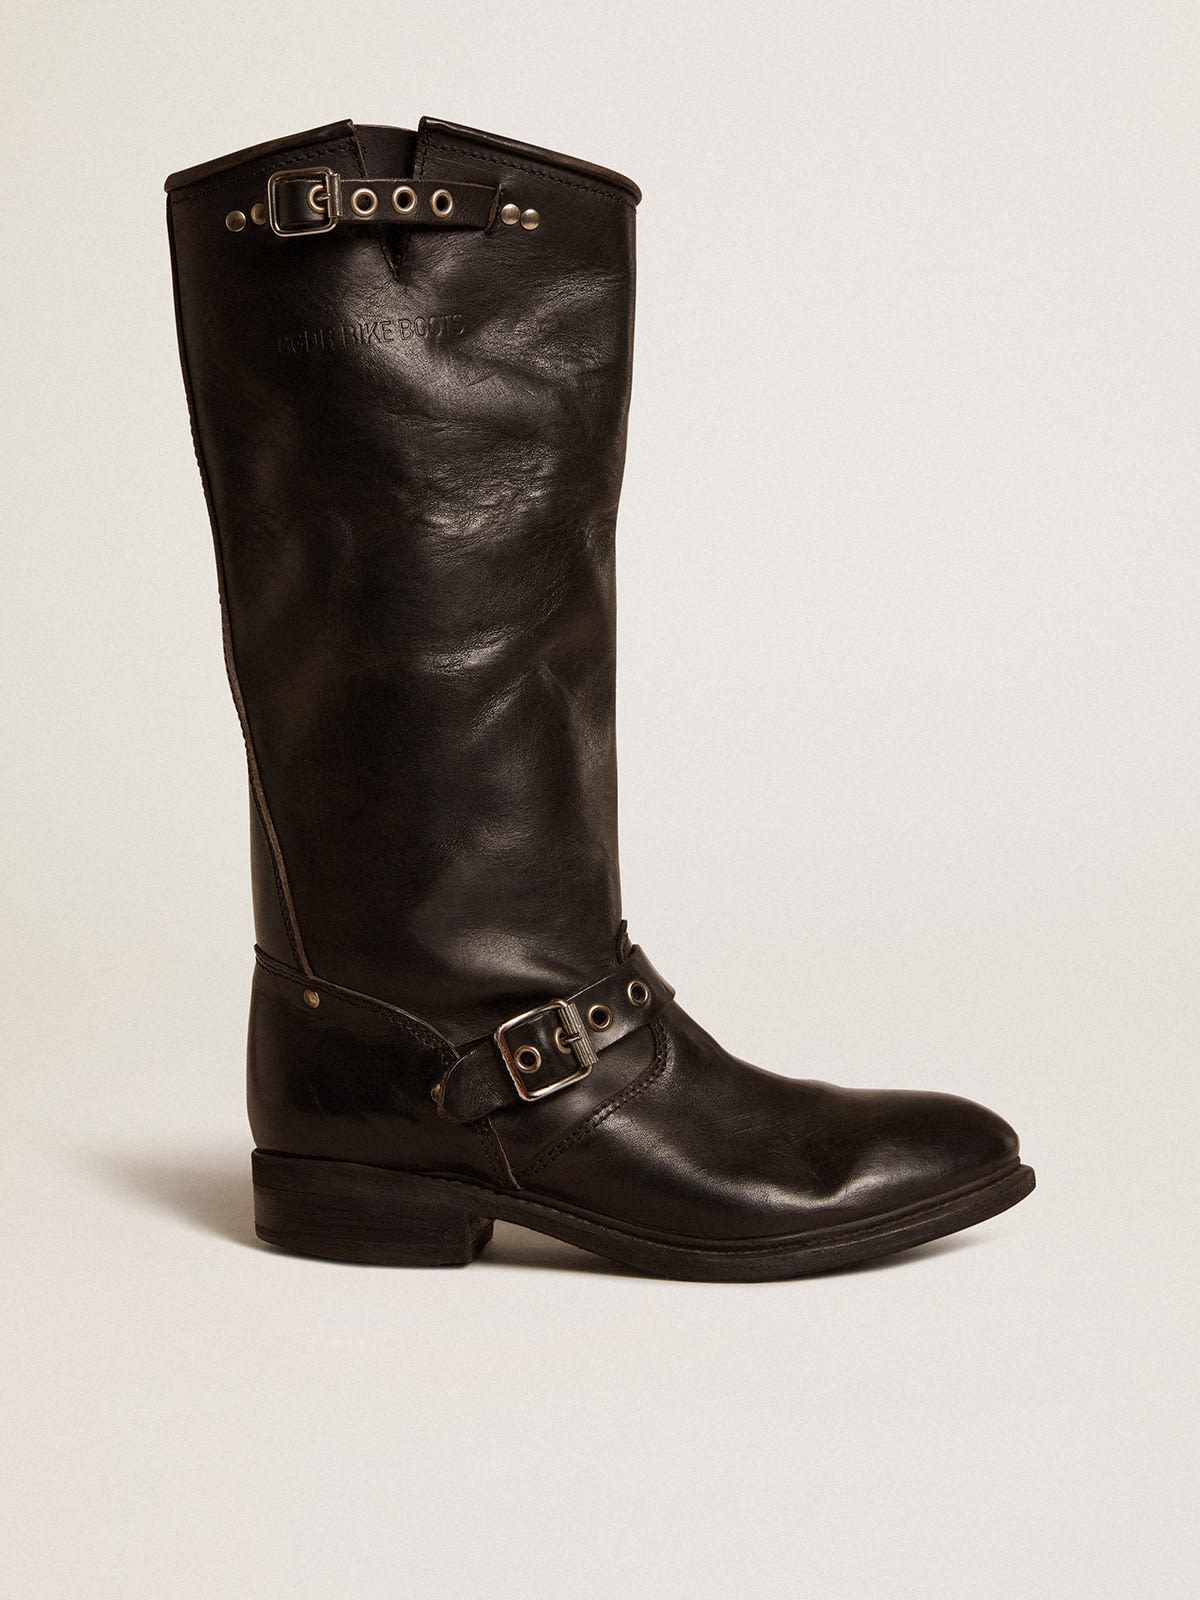 Golden Goose - High Biker boots in black leather with silver studs and buckles in 